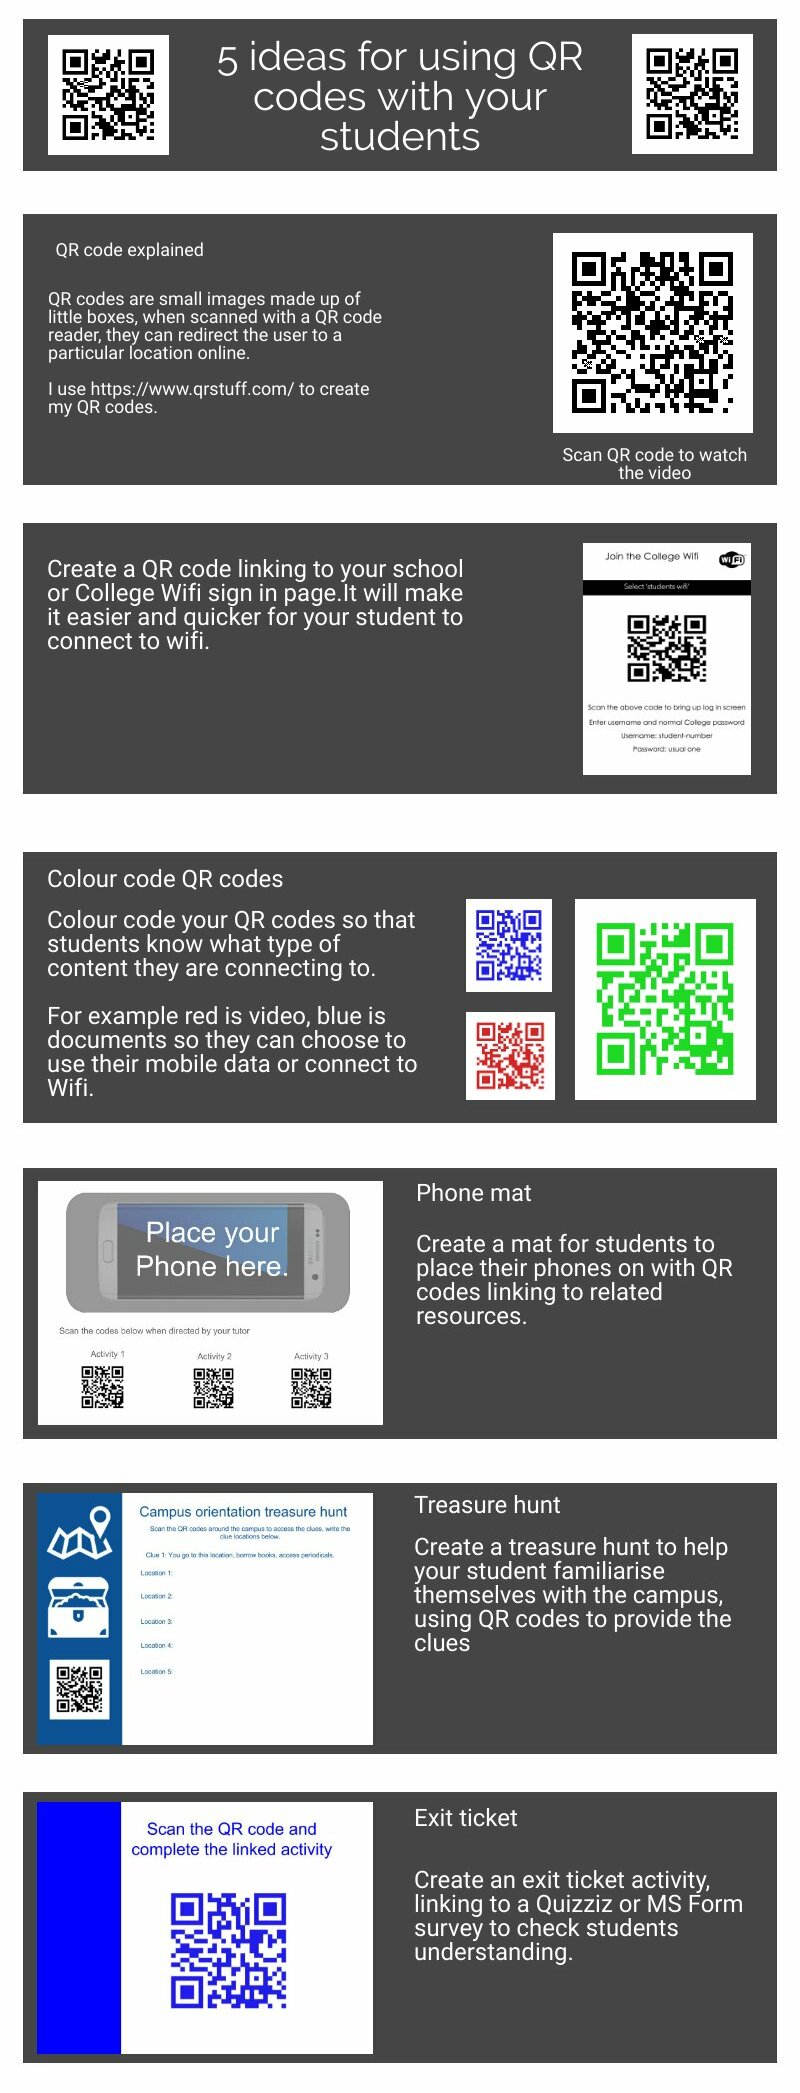 ideas for using QR codes with your students | Piktochart Visual Editor